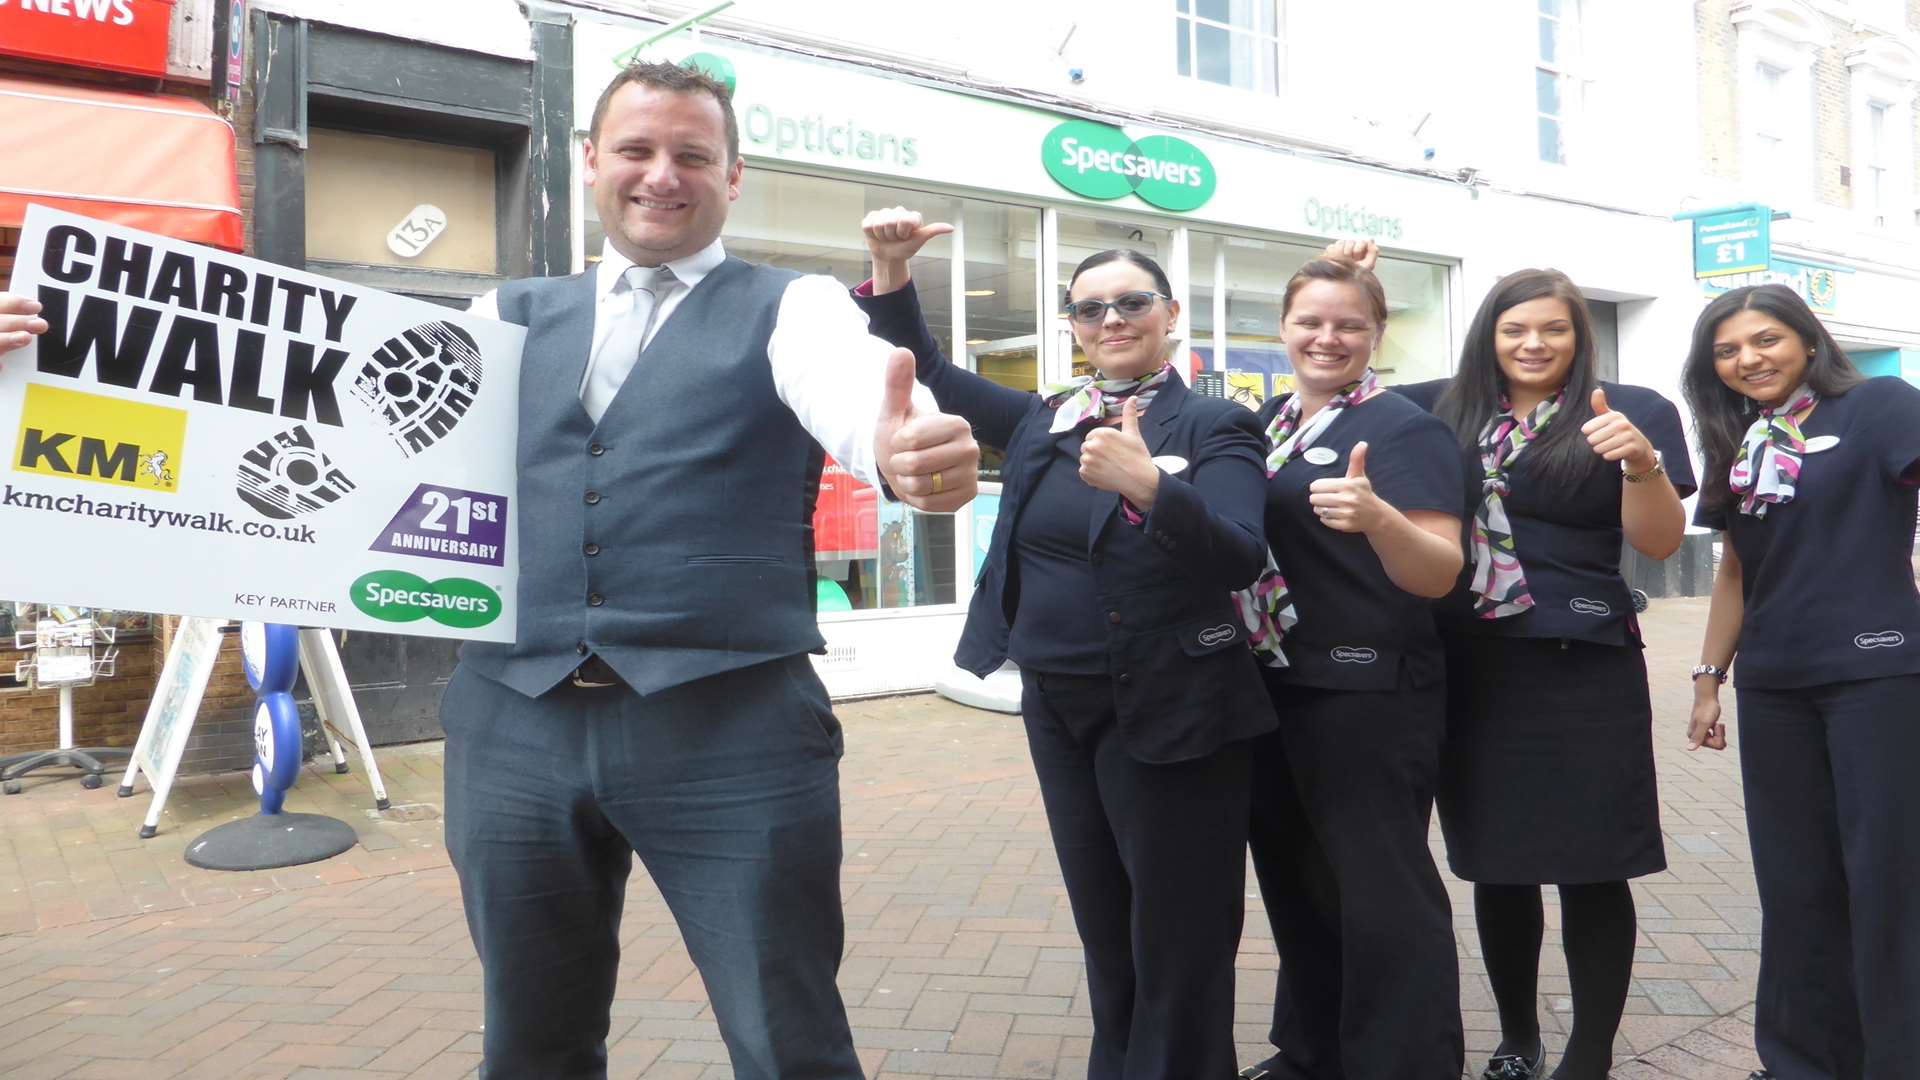 Specsavers Kent Regional Chairman Matt Trusty and staff show their support for the 21st KM Charity Walk staged on Sunday, June 26 from Mote House, Maidstone